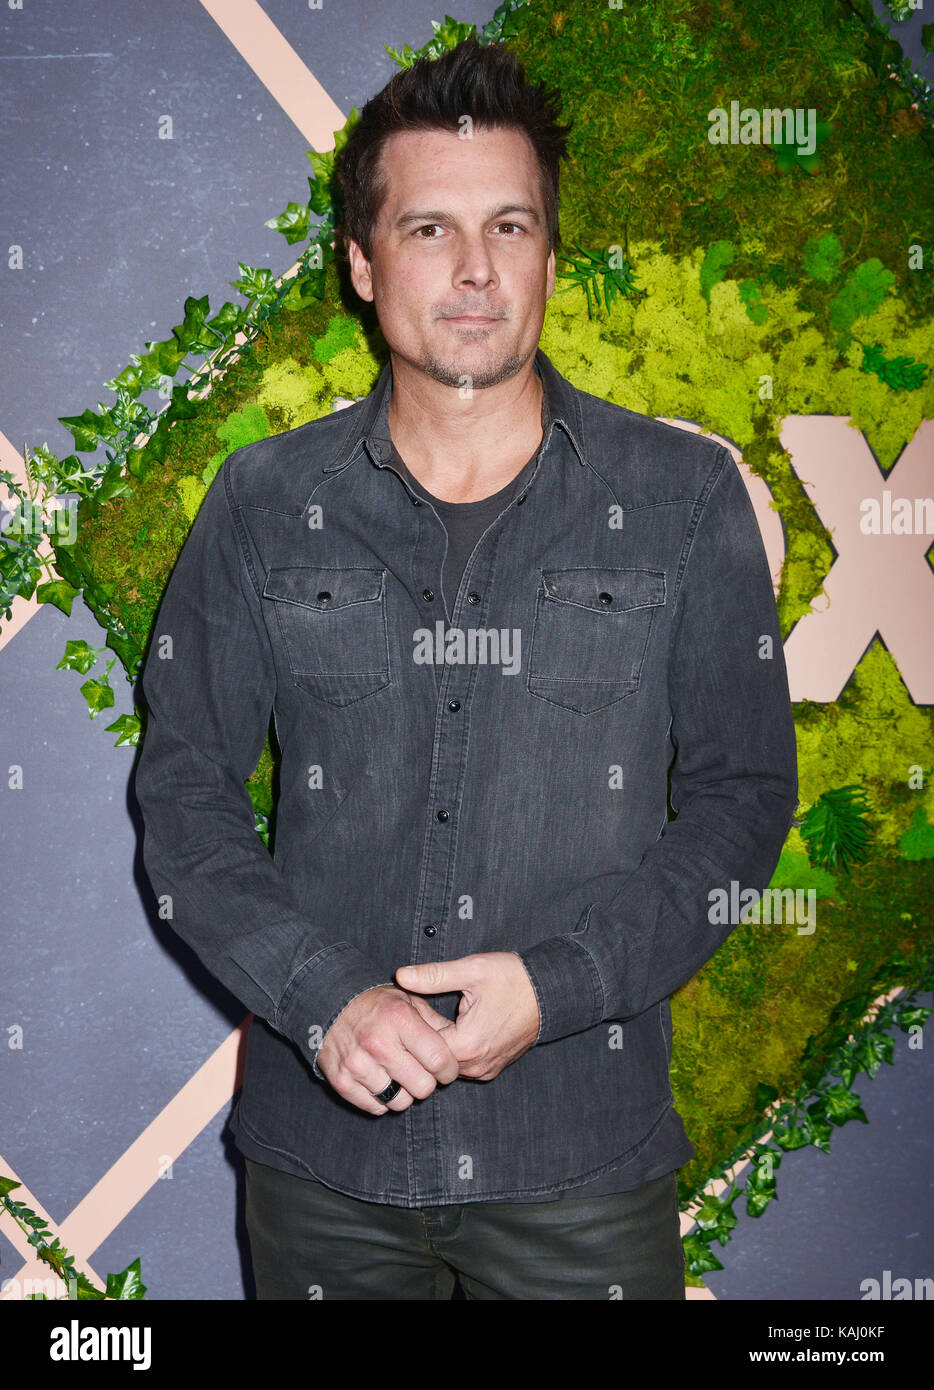 Los Angeles, USA. 25th Sep, 2017. Len Wiseman 126 arriving at the Fox Fall Party 2017 at the CATCH LA in Los Angeles. September 25, 2017. Credit: Tsuni / USA/Alamy Live News Stock Photo